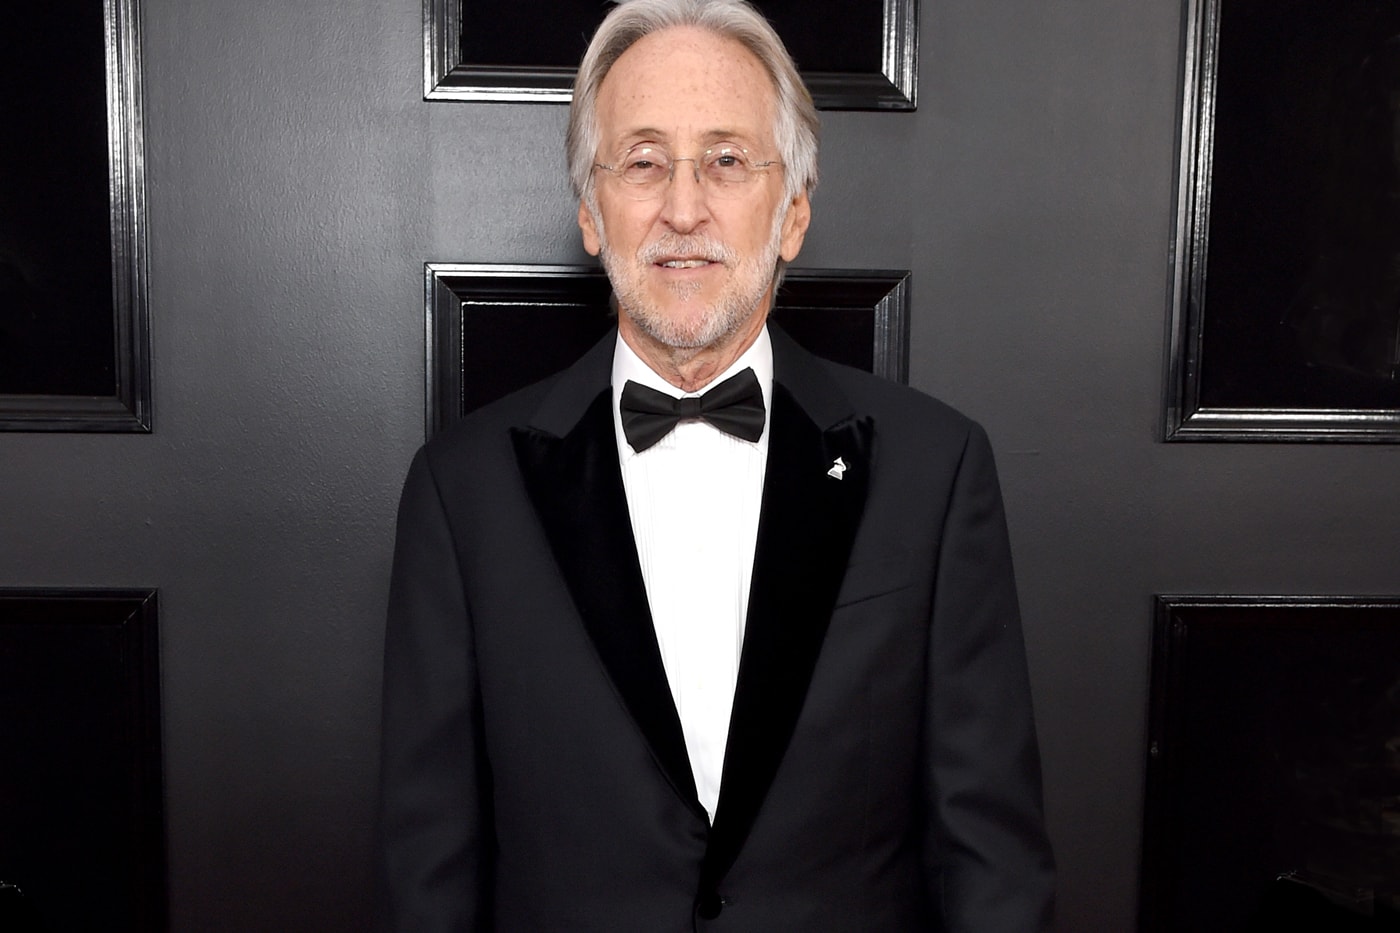 Grammys/Recording Industry CEO and President Neil Portnow Responds to Kanye West